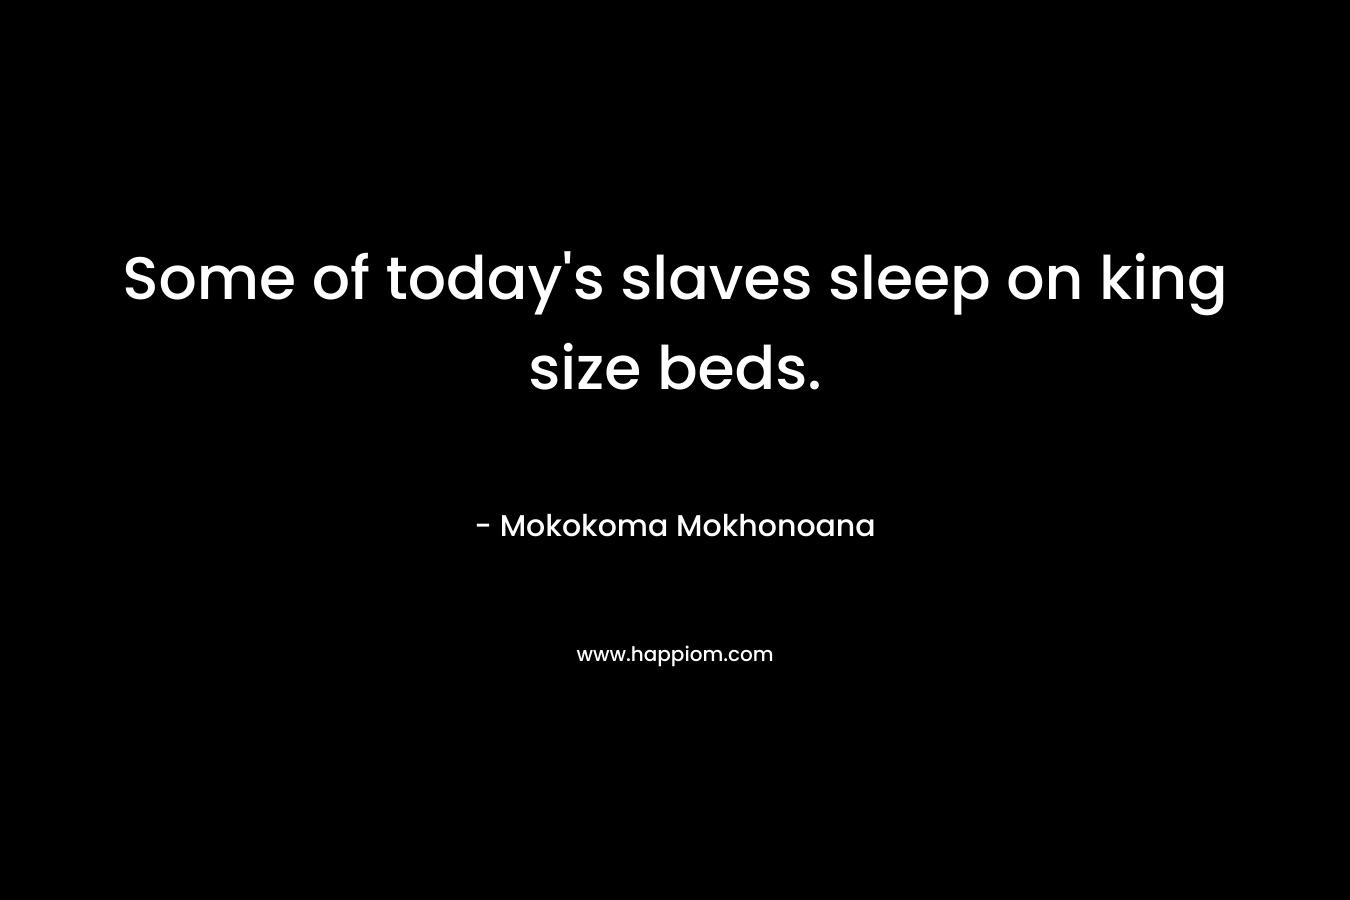 Some of today's slaves sleep on king size beds.